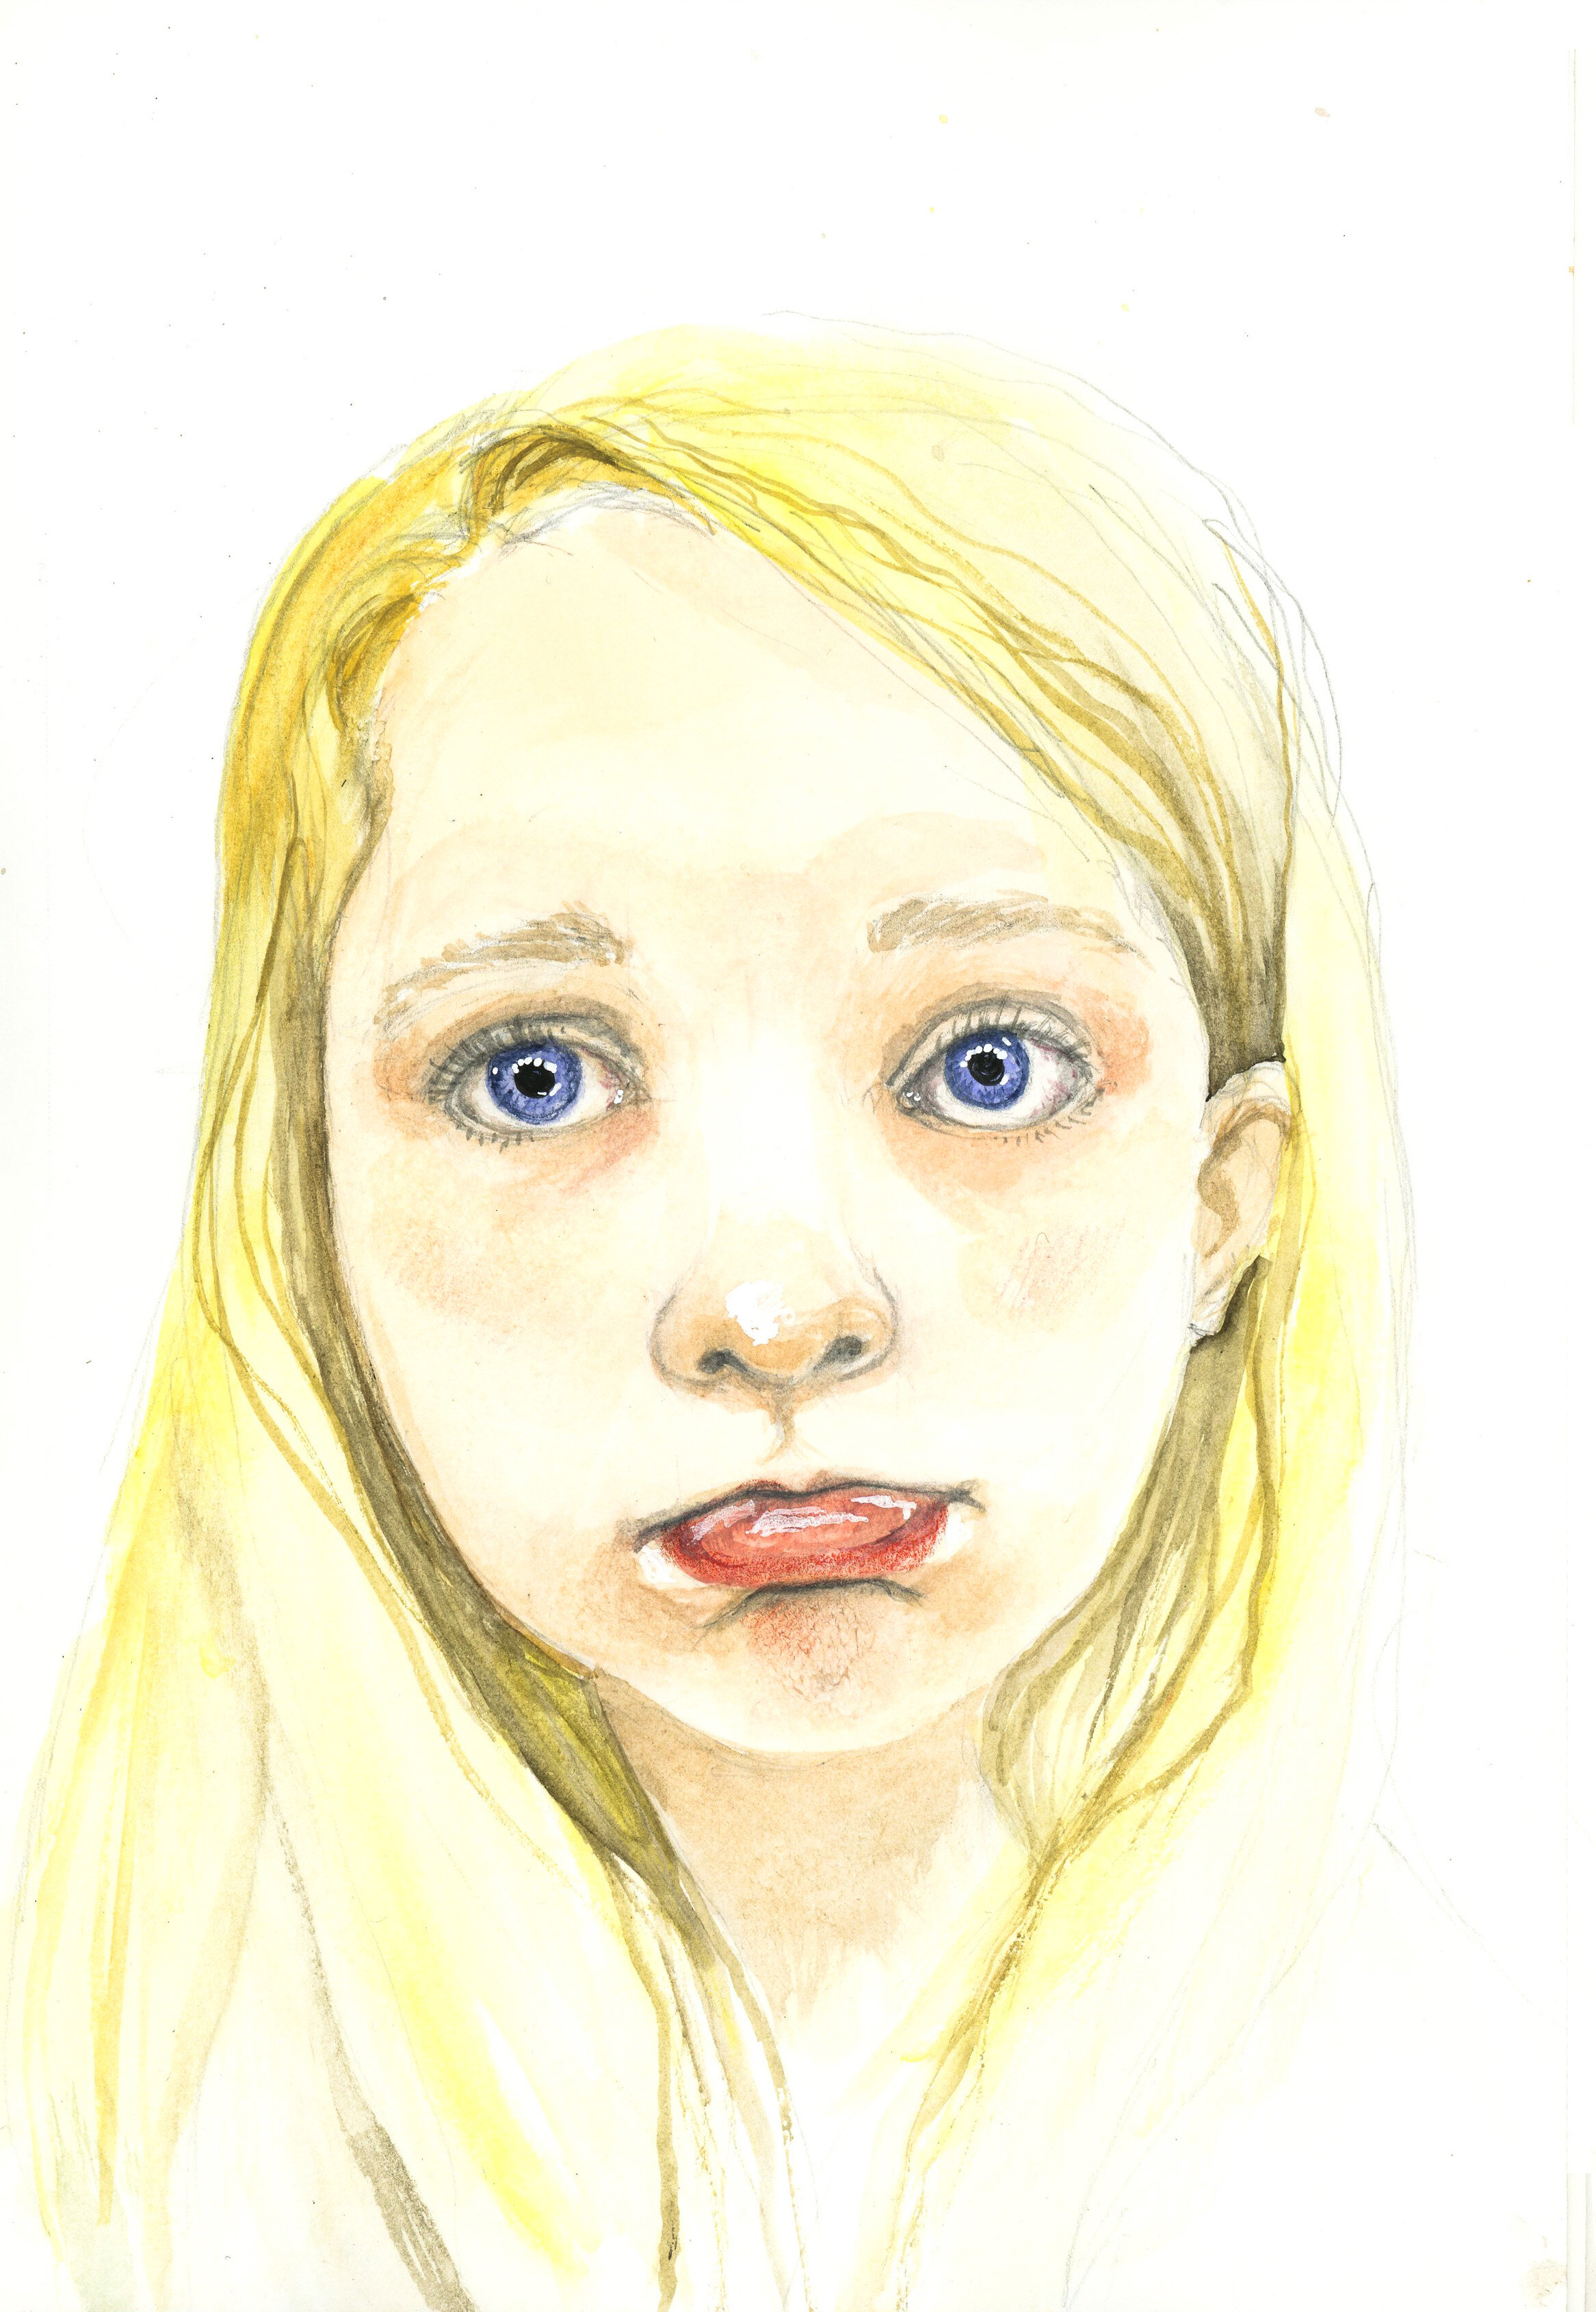 Deann Acton, Pout, watercolor or ink on paper, 2020.jpg